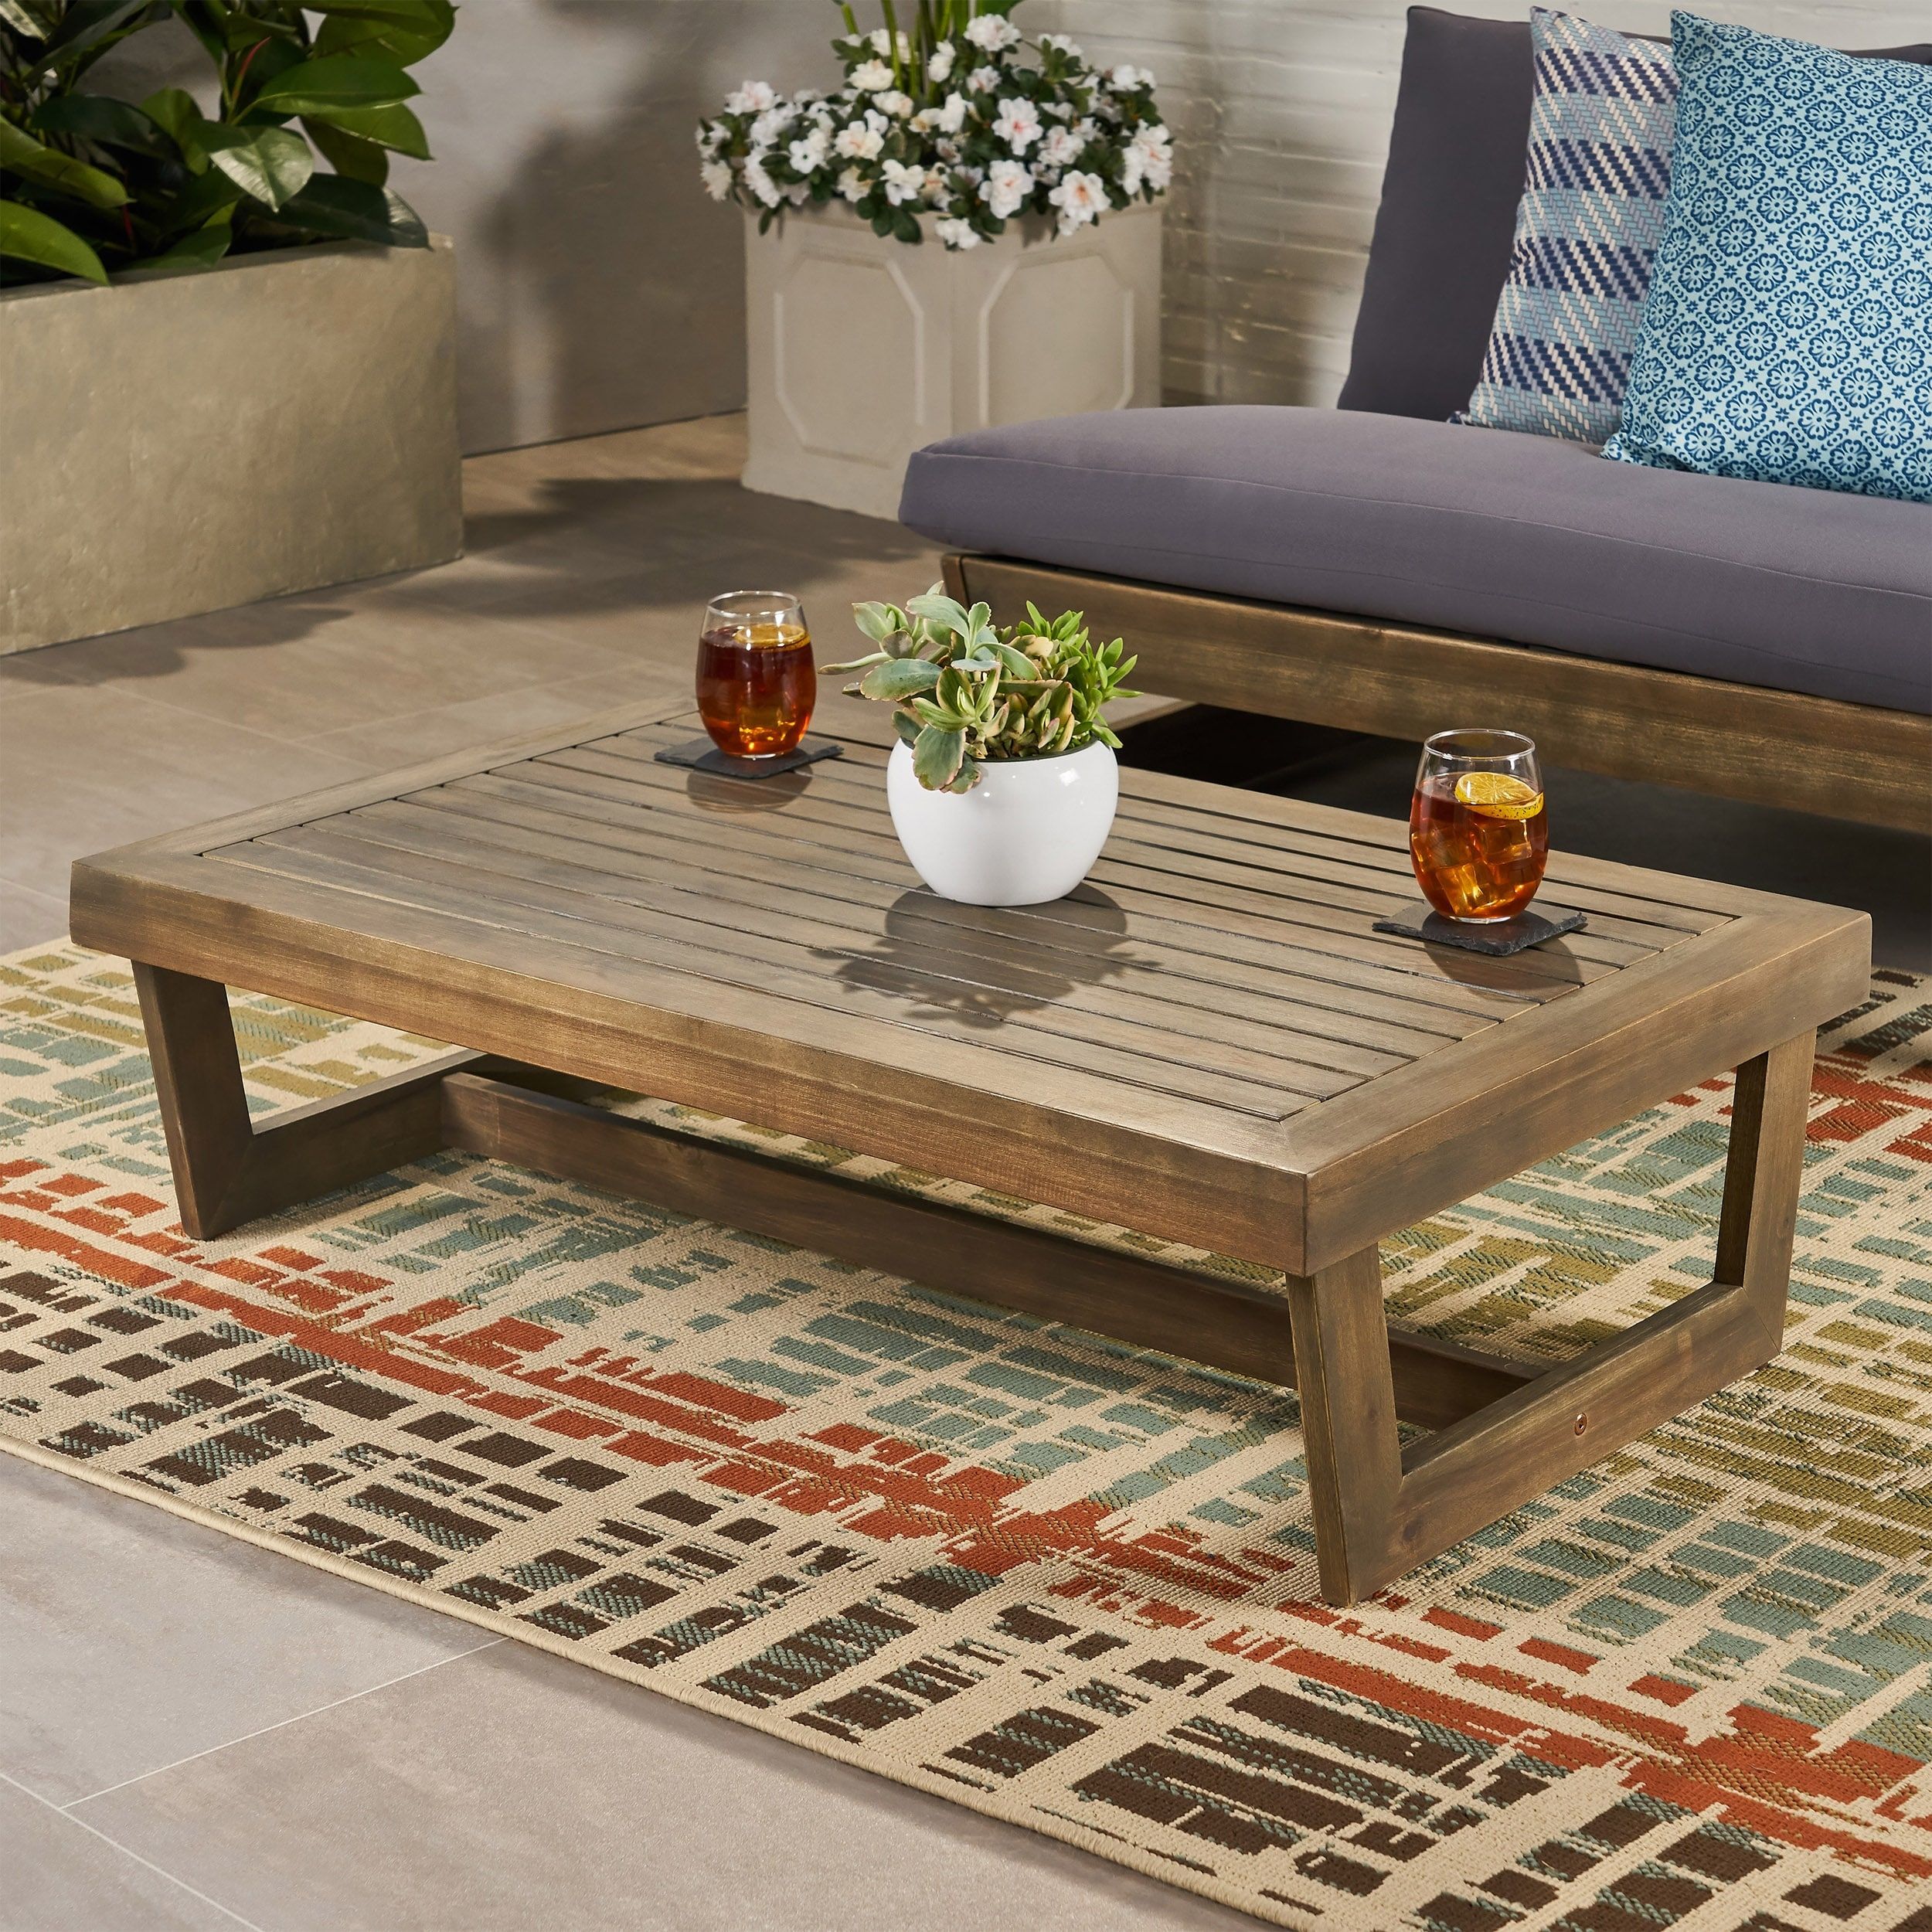 Sherwood Outdoor Acacia Wood Coffee Tablechristopher Knight Home – On  Sale – Overstock – 28422818 Regarding Acacia Wood Coffee Tables (View 9 of 15)